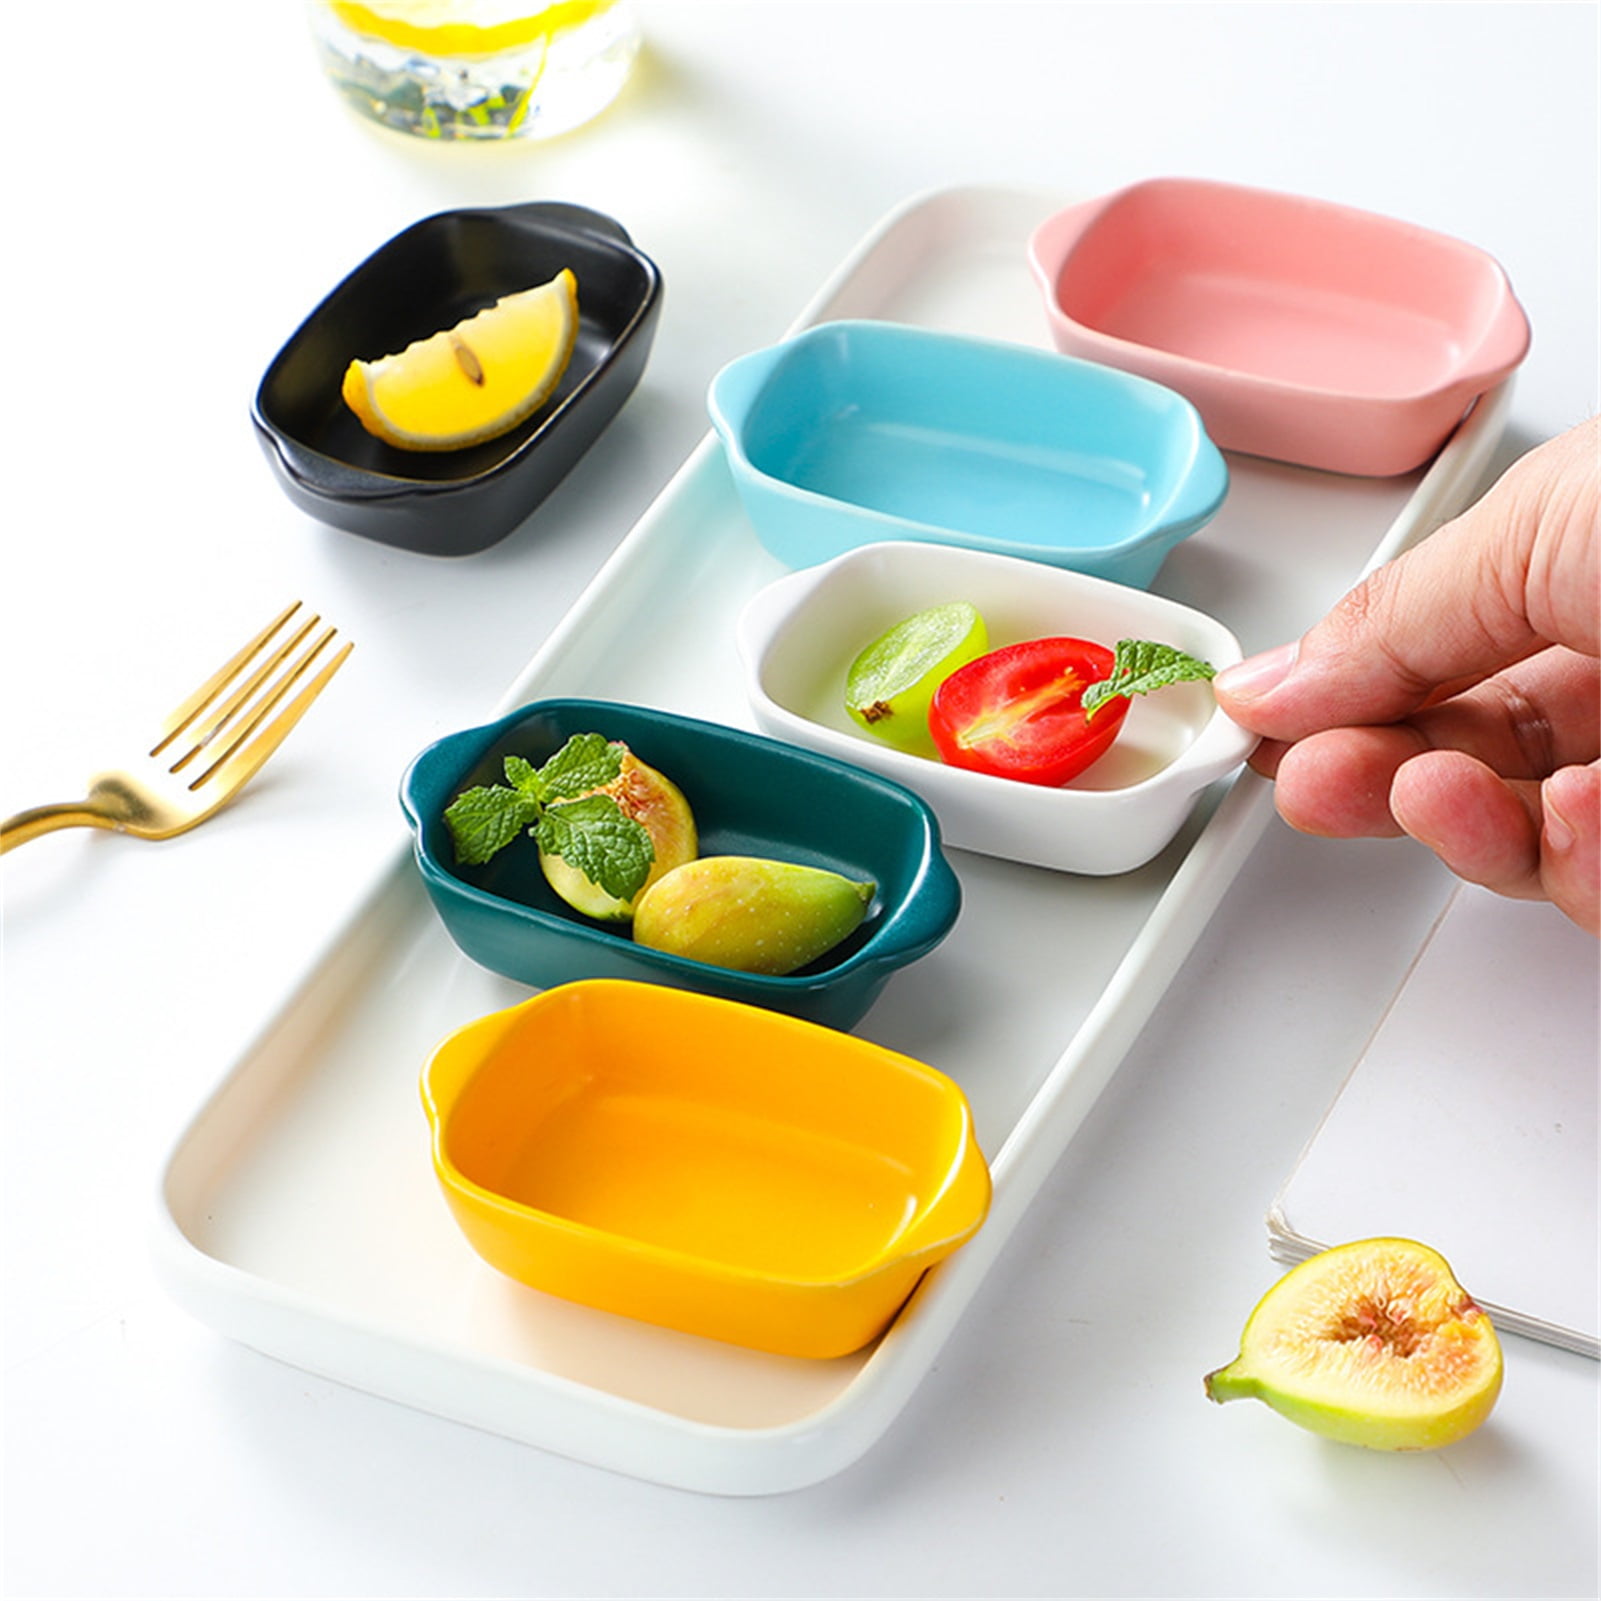 Coloful Hemoton 2pcs Stainless Steel Sauce Dish Round Seasoning Dishes Mini Appetizer Plates Dipping Saucers Bowl 